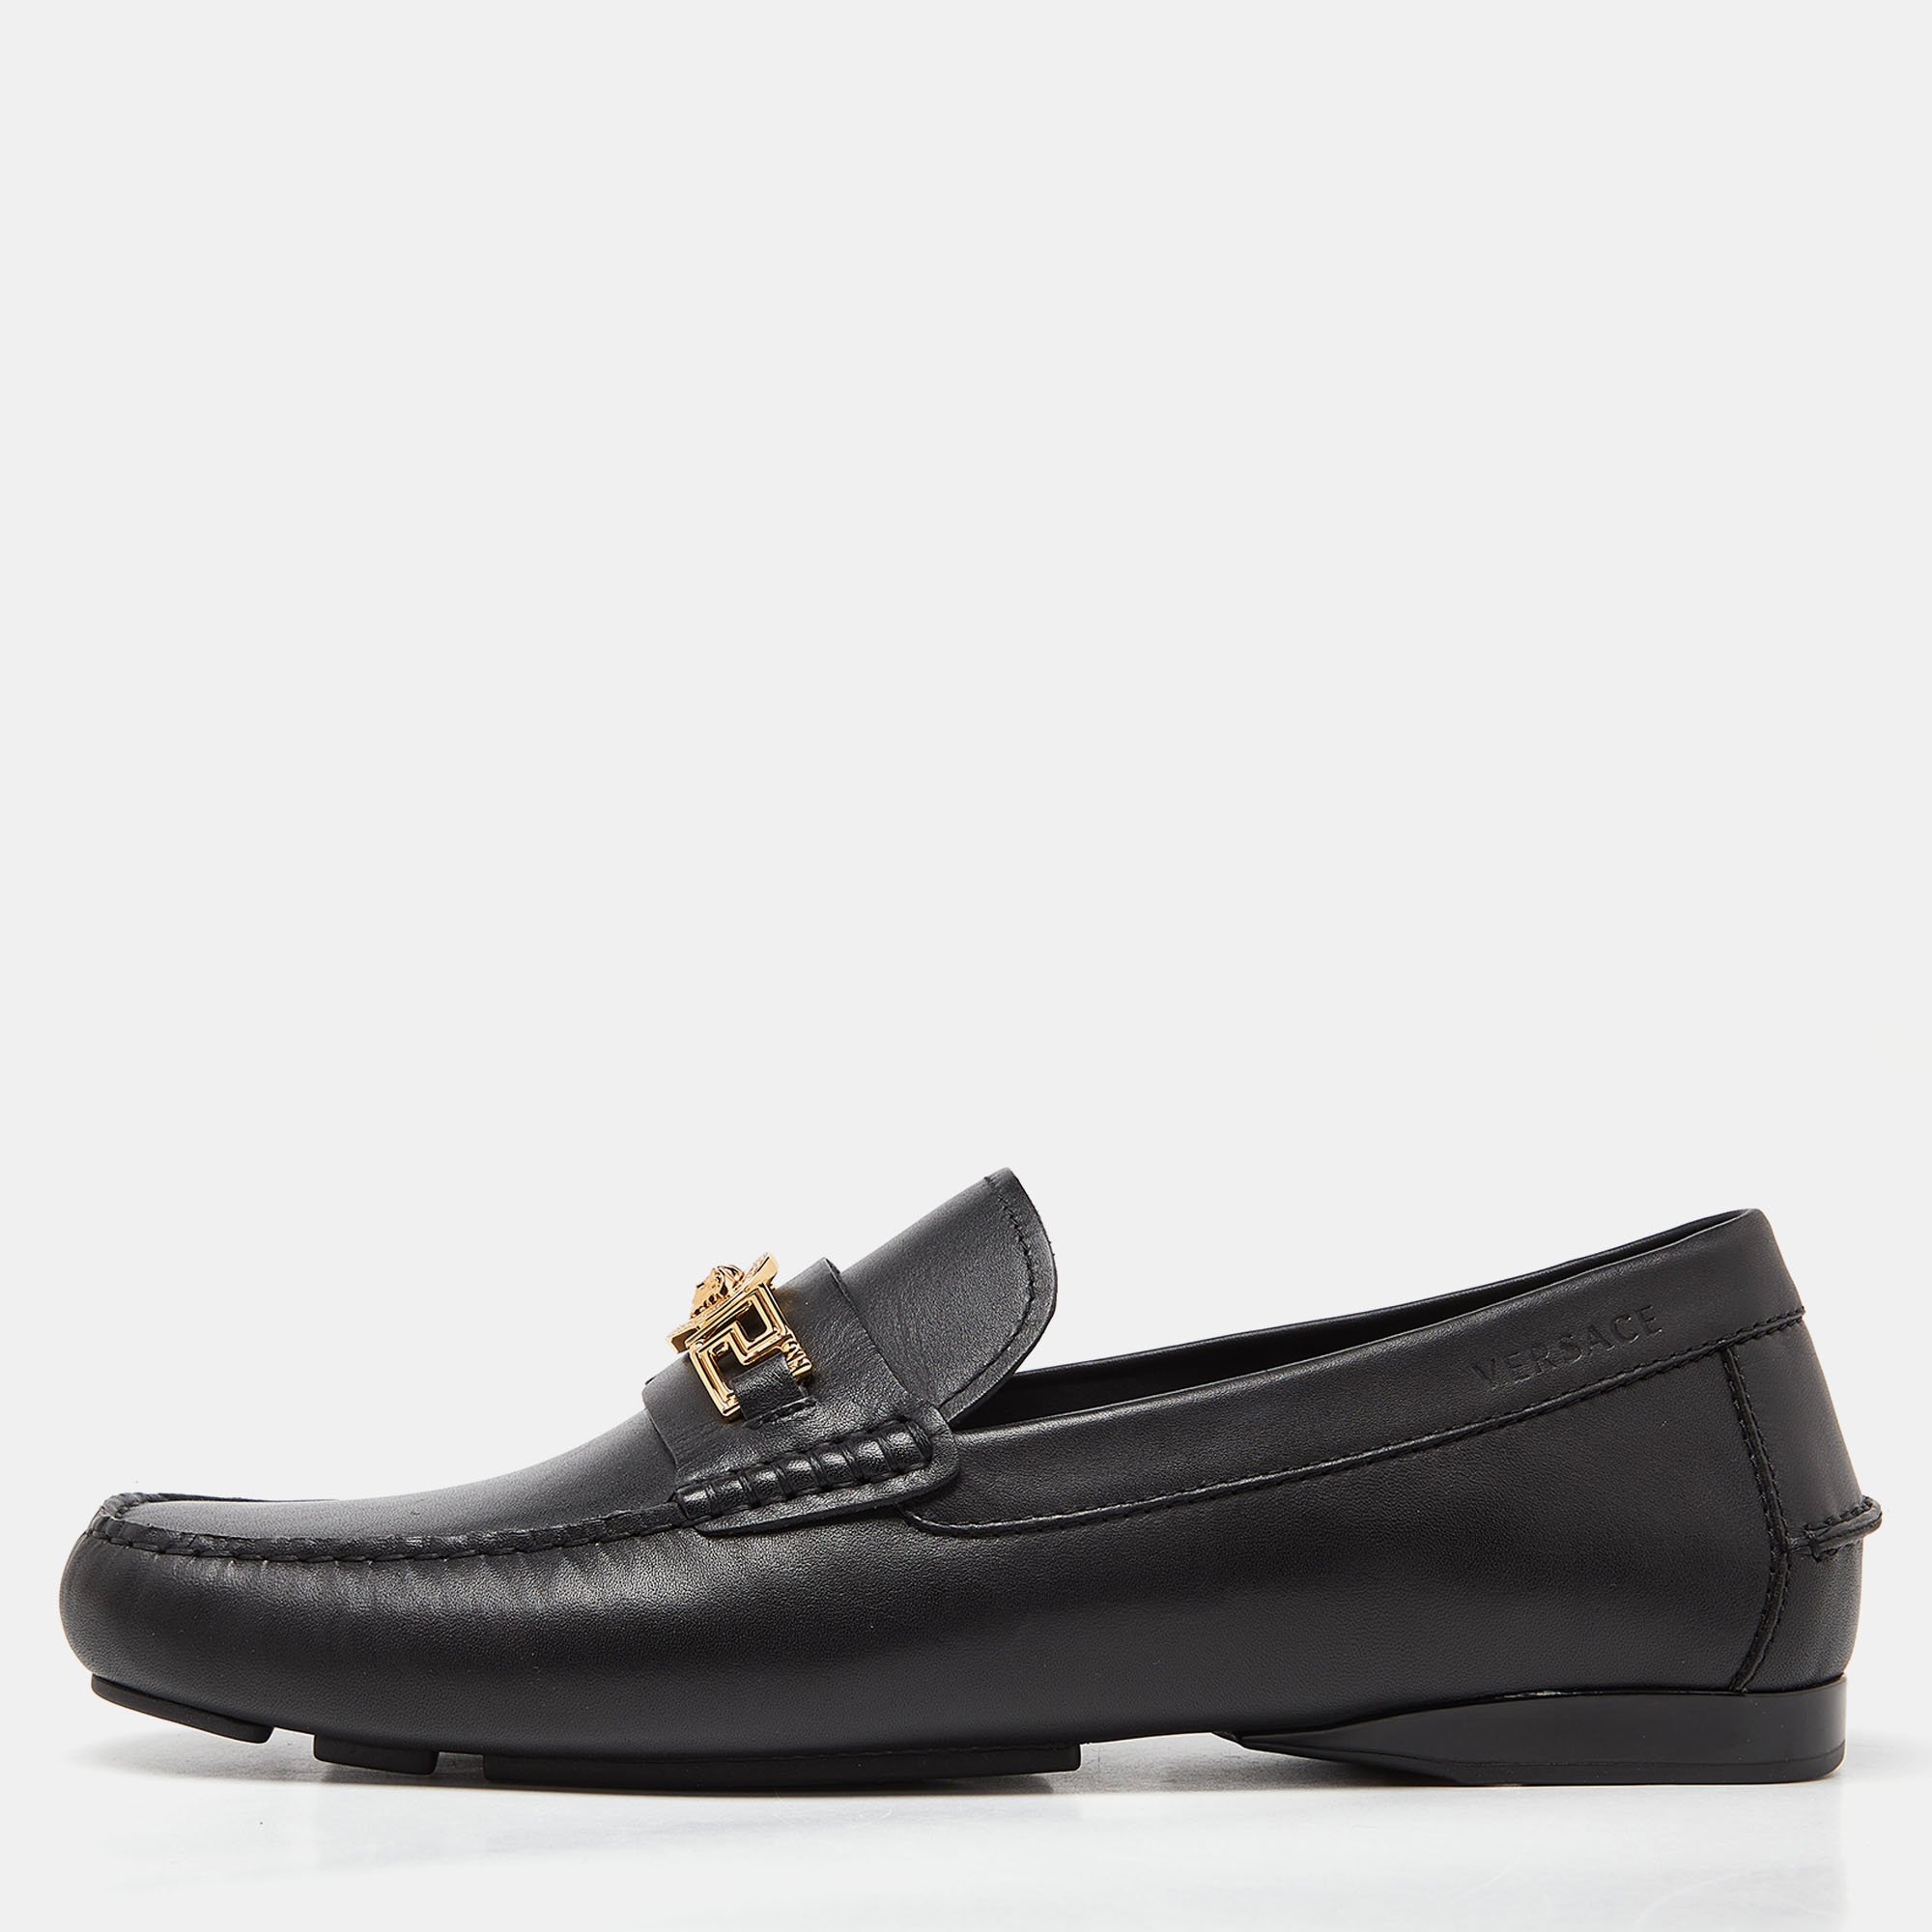 Pre-owned Versace Black Leather Medusa Slip On Loafers Size 44